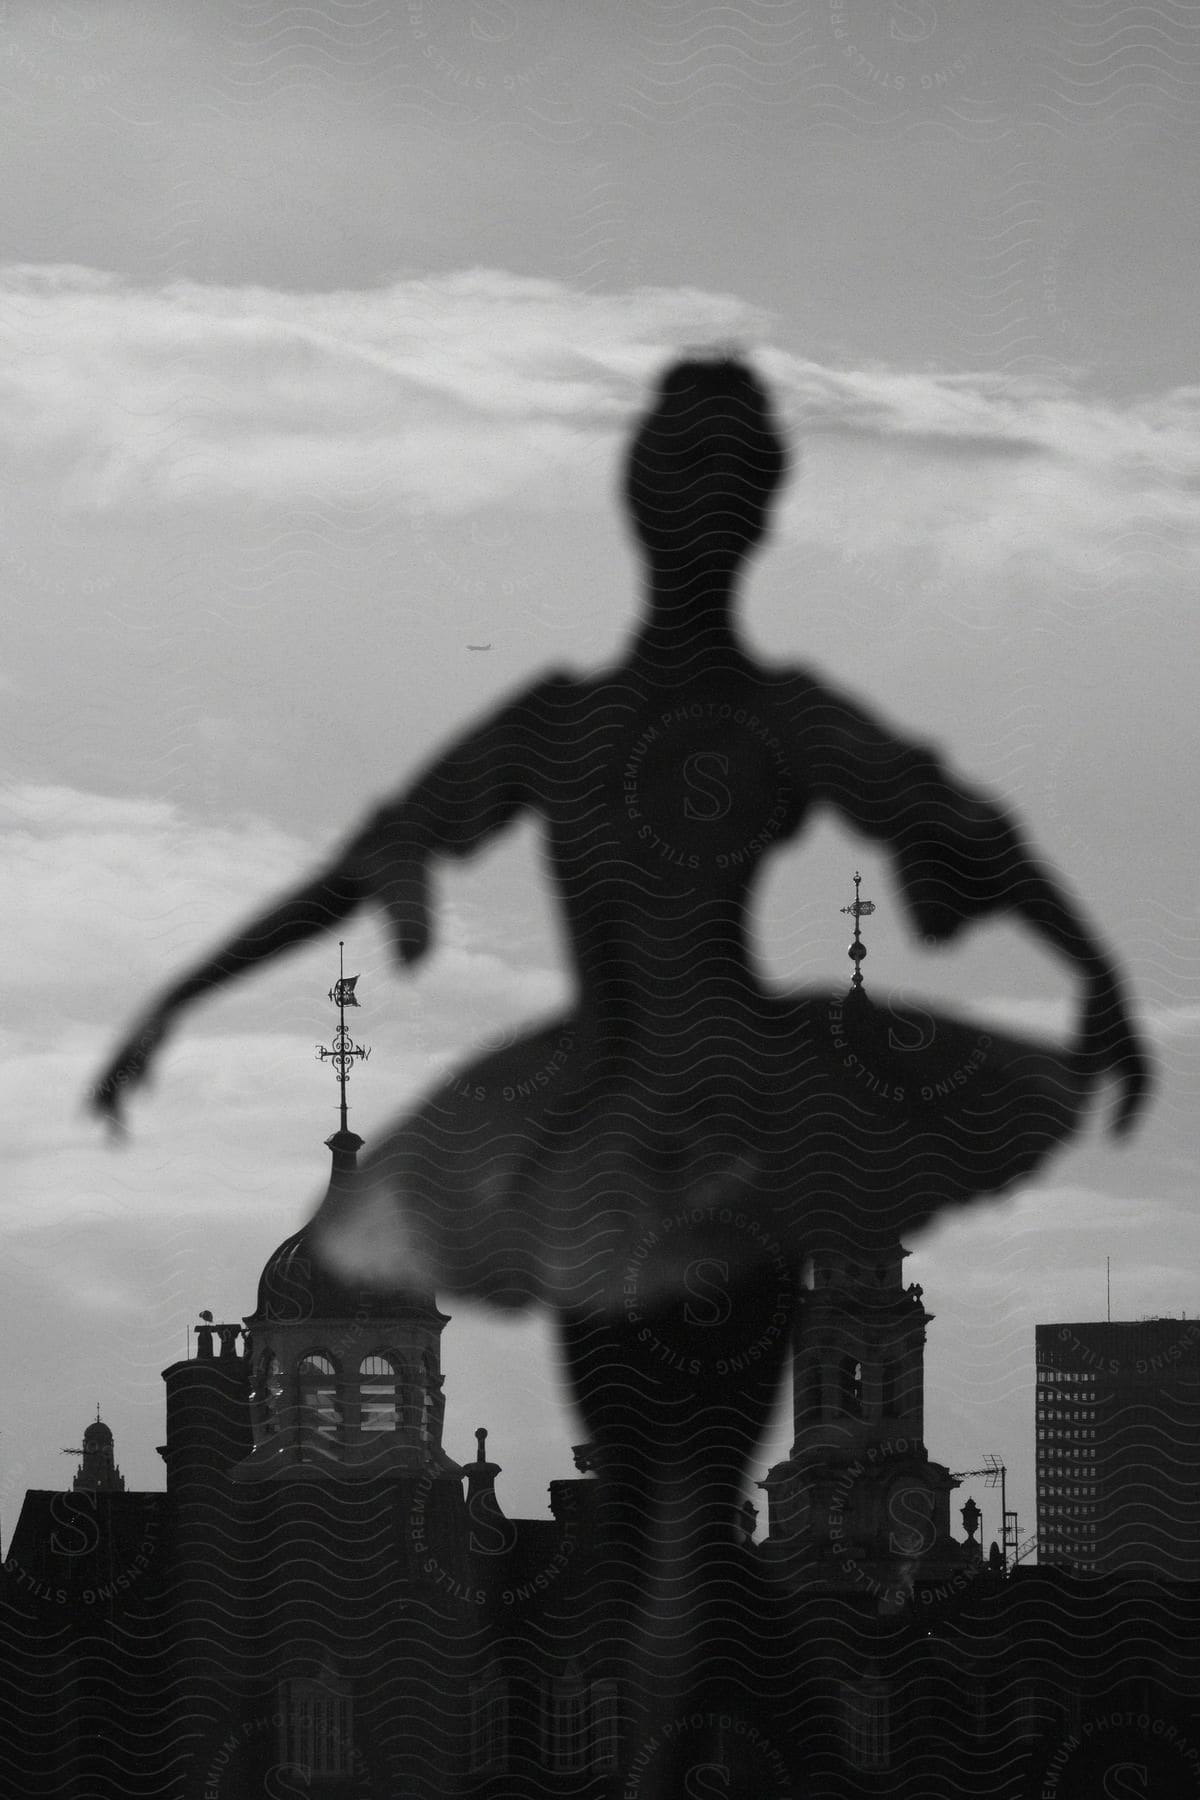 Stock photo of a dancer is performing a ballet move with the view of buildings.